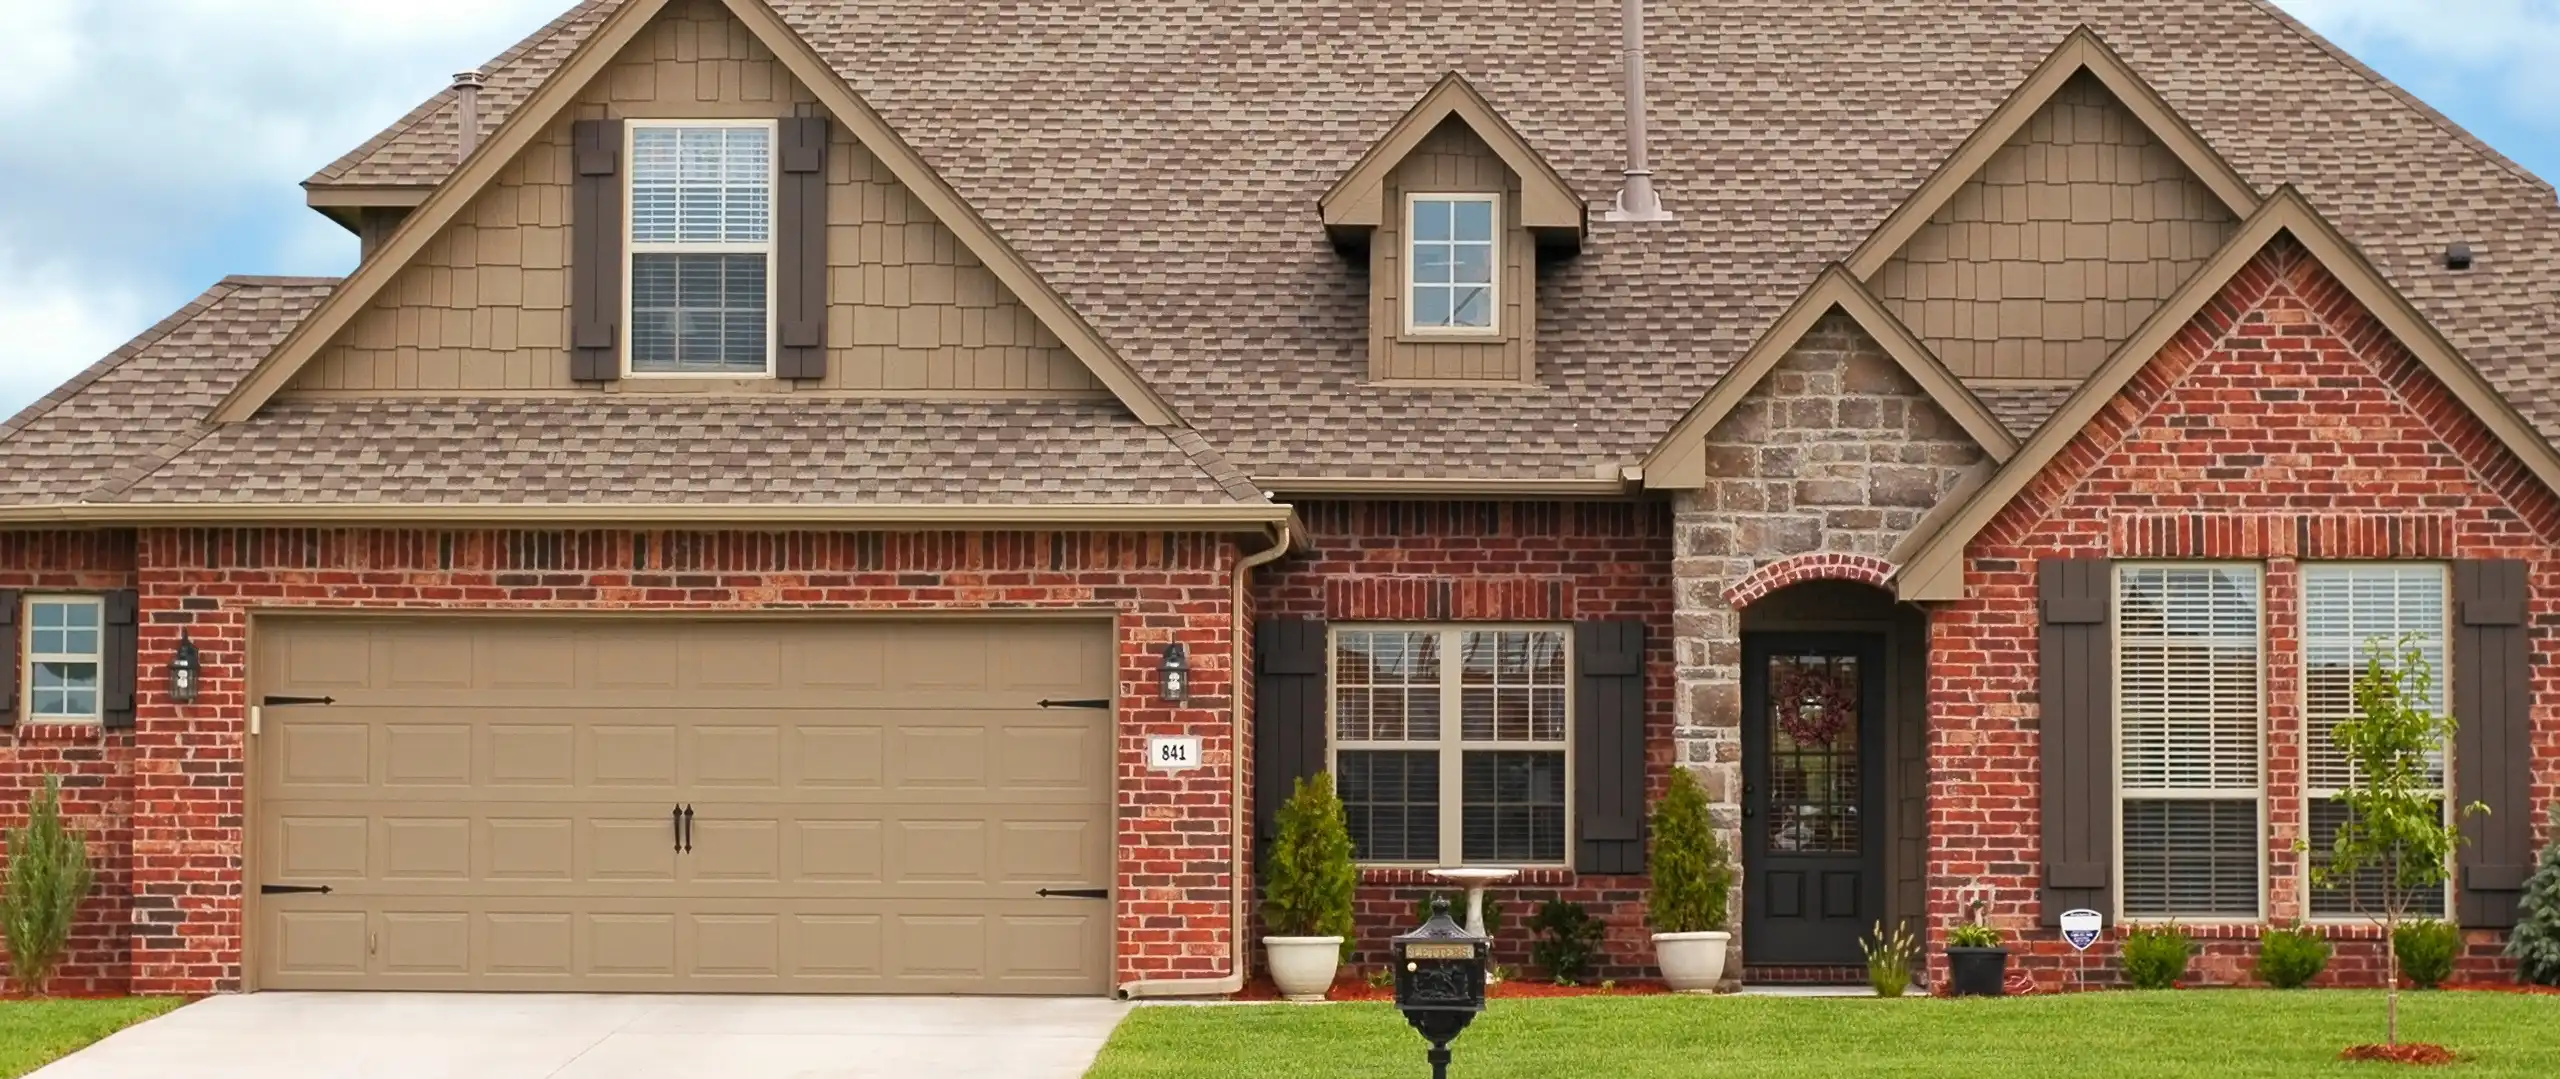 Brick home in a suburban neighborhood - Keep pests away from your home with Arrow Exterminators, Inc. in OK